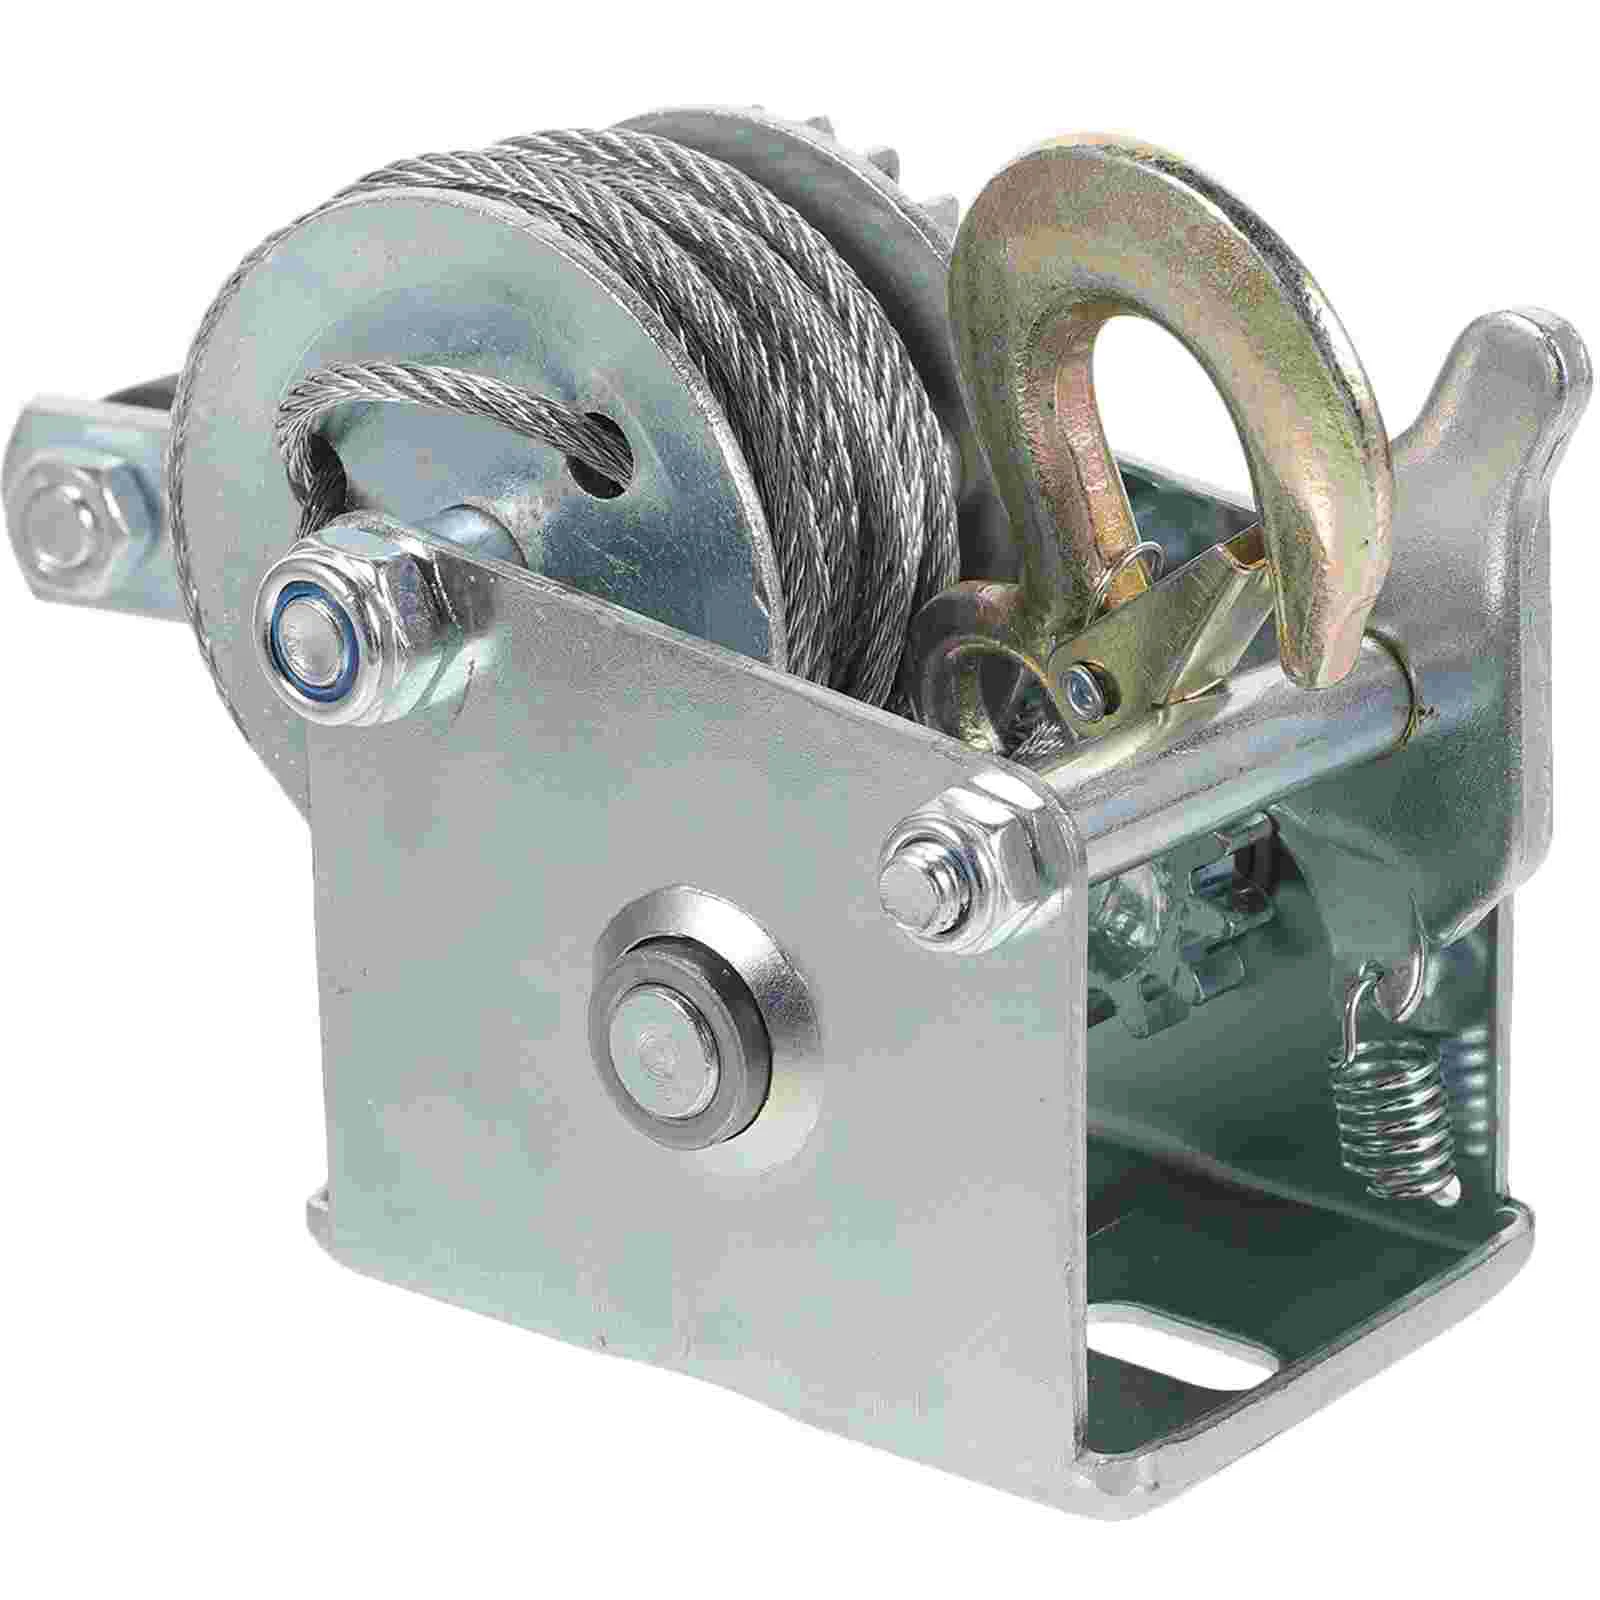 

Towing Hand Winch Loading Boat Manual Mini 500lb Marine Trailer Crank Wire Rope Gear Winches